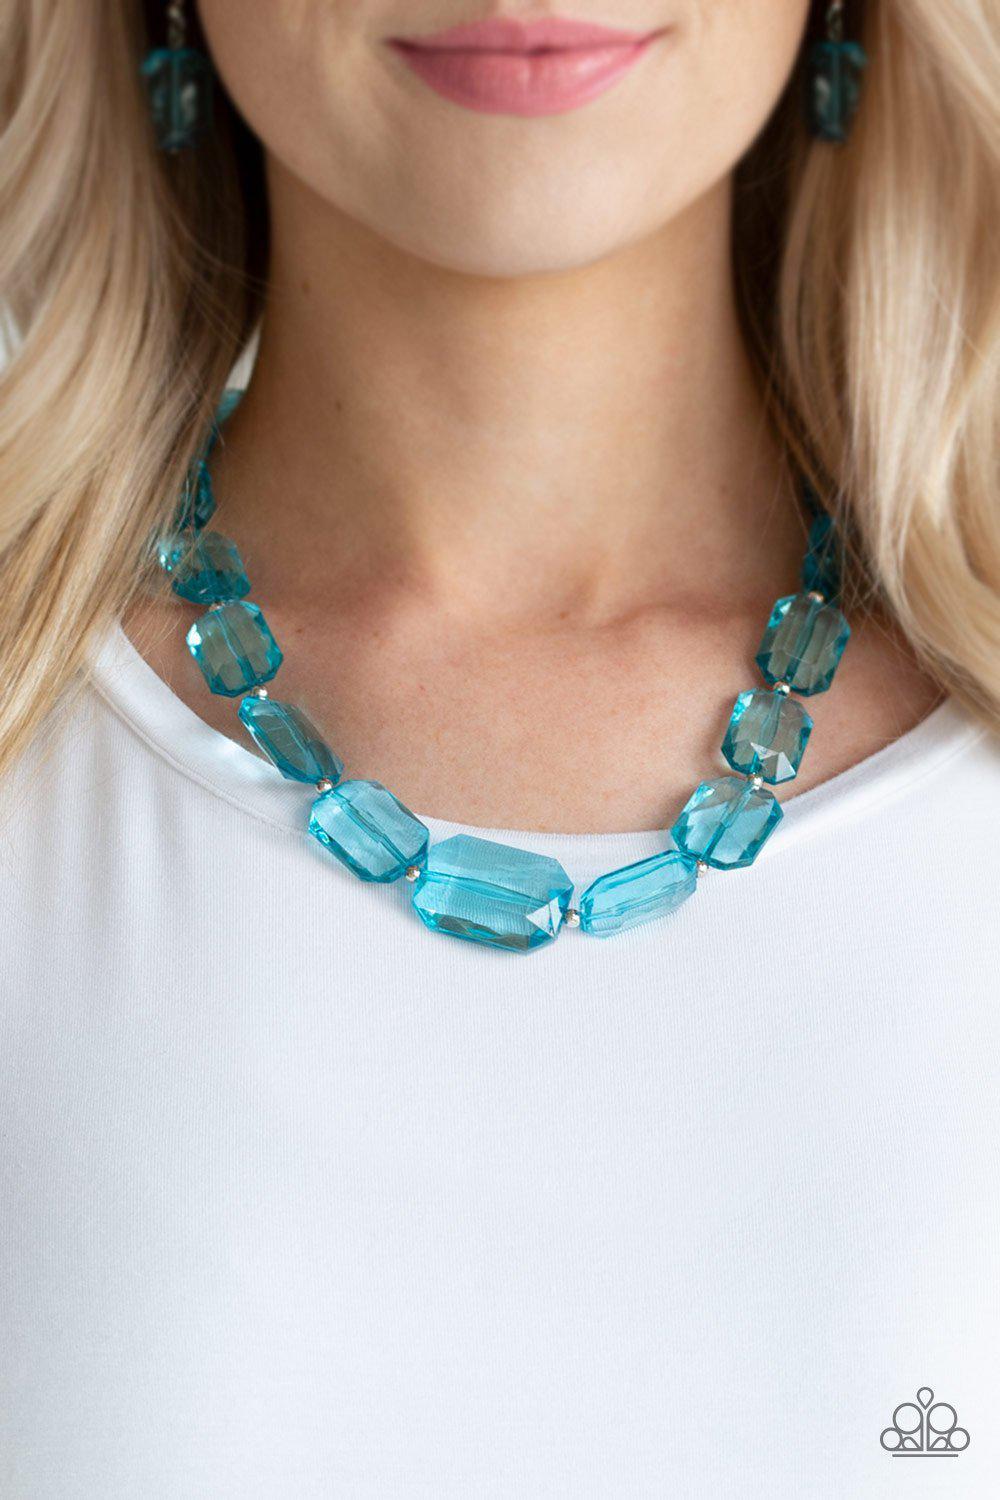 ICE Versa Blue Acrylic Necklace and matching Earrings - Paparazzi Accessories-CarasShop.com - $5 Jewelry by Cara Jewels